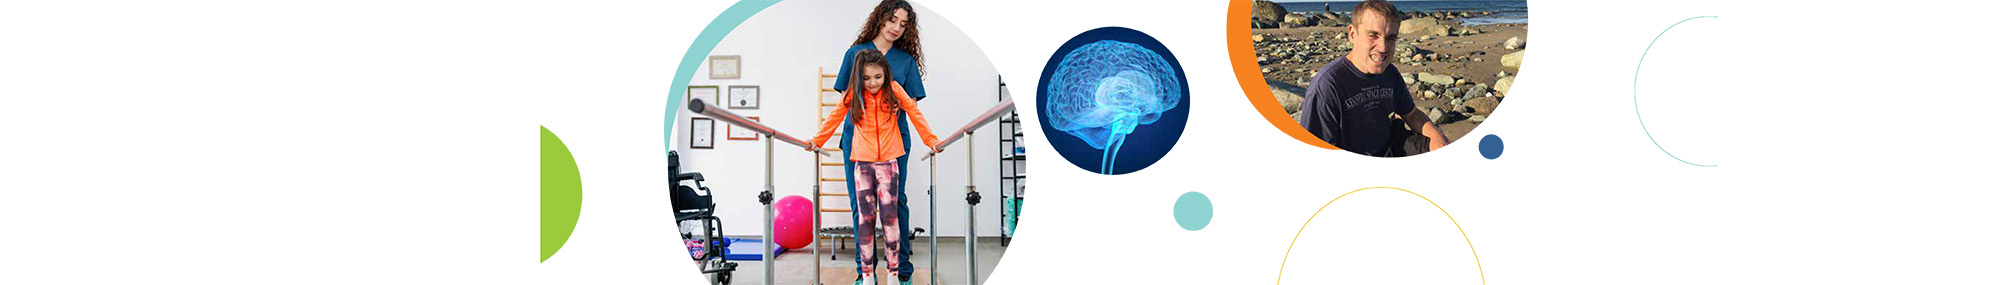 A series of three circular images related to disability research, including a child and health care provider during a physical therapy appointment (left), a 3D brain illustration (center), and a person with Fragile X syndrome at the beach (right).